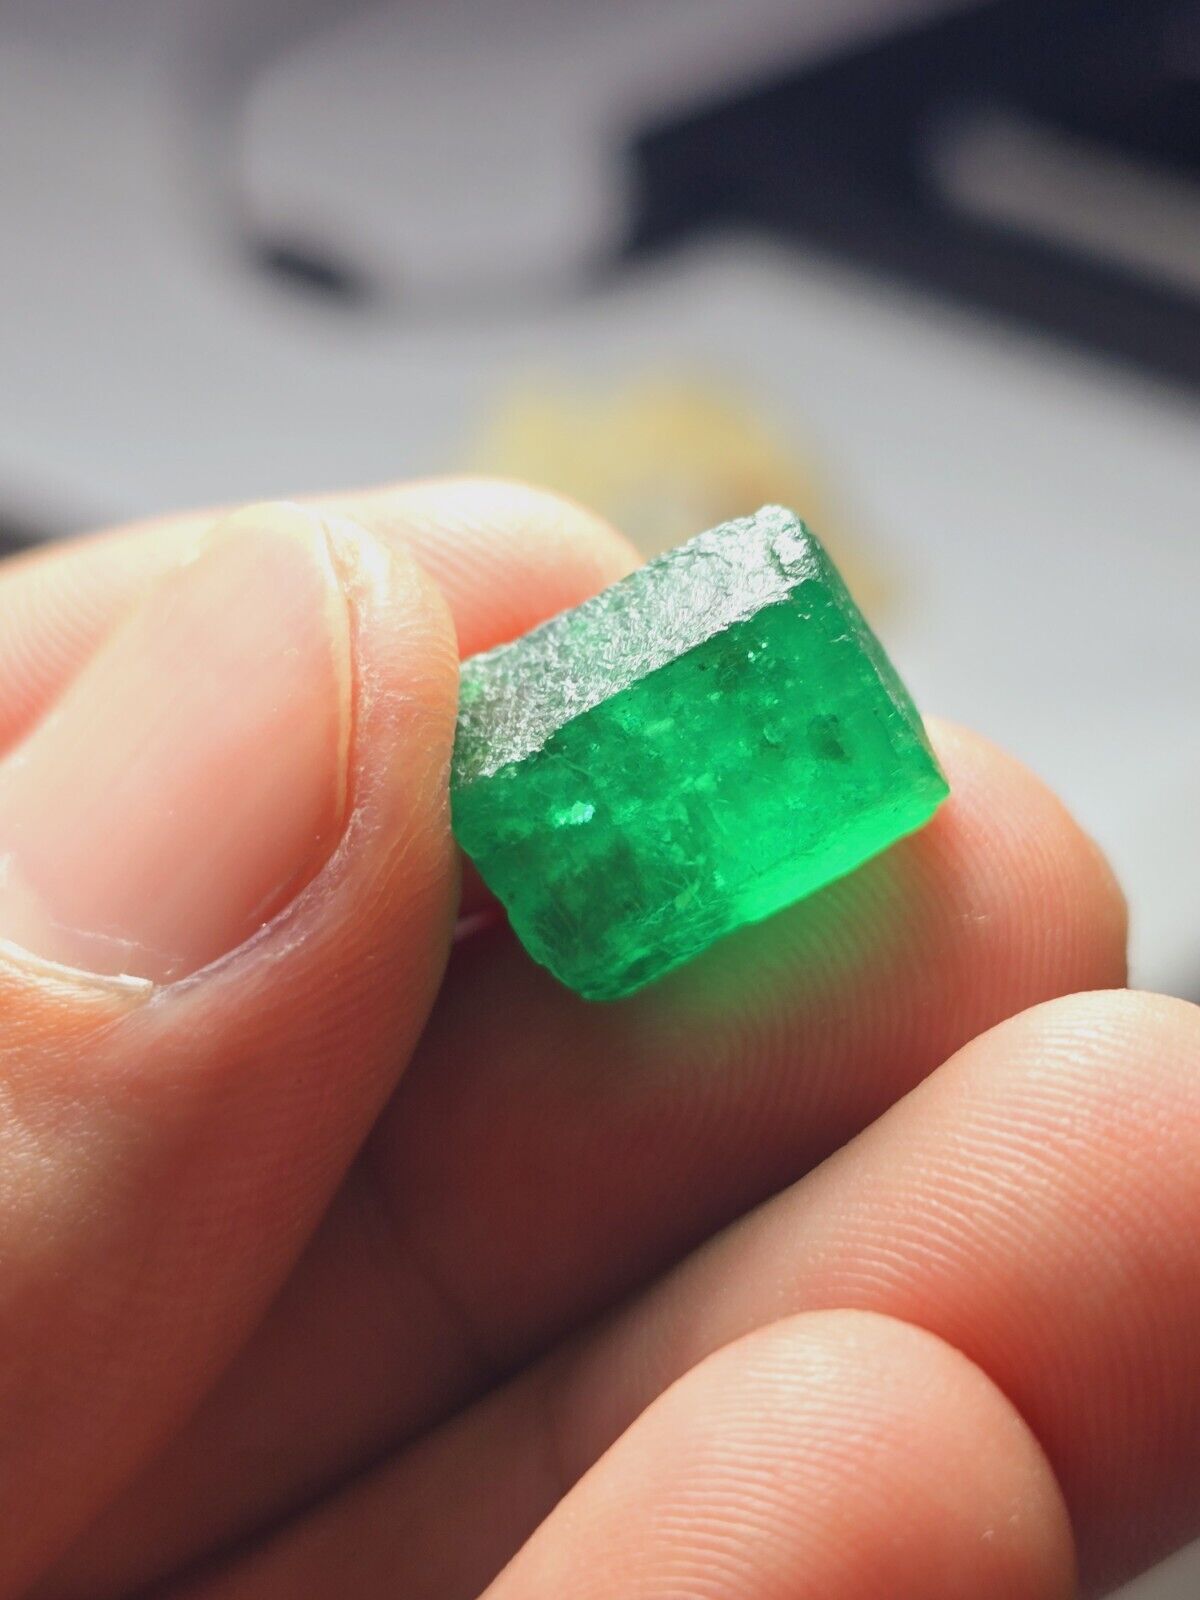 18-CT Facets Quality Natural Emerald Crystal Type Rough Piece@Swat Mine,Pakistan